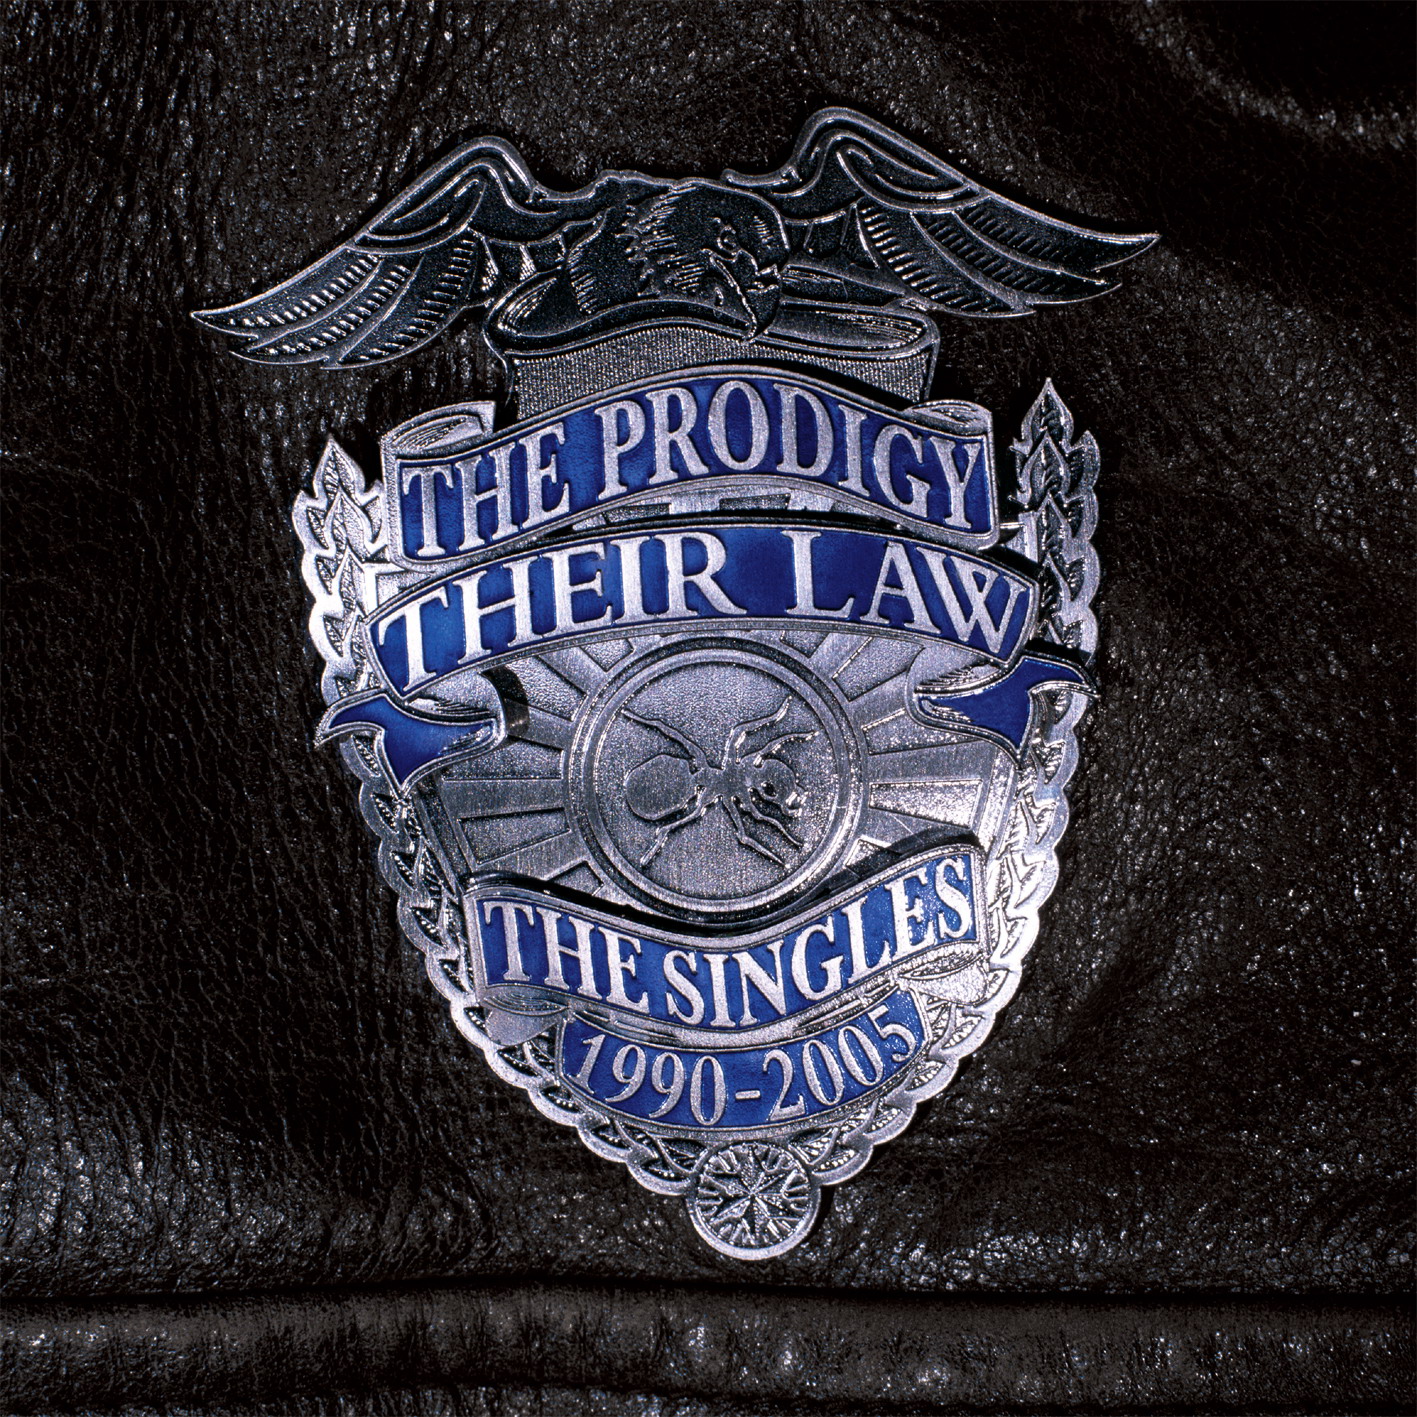 The Prodigy - Their Law - The Singles 1990-2005 - CD